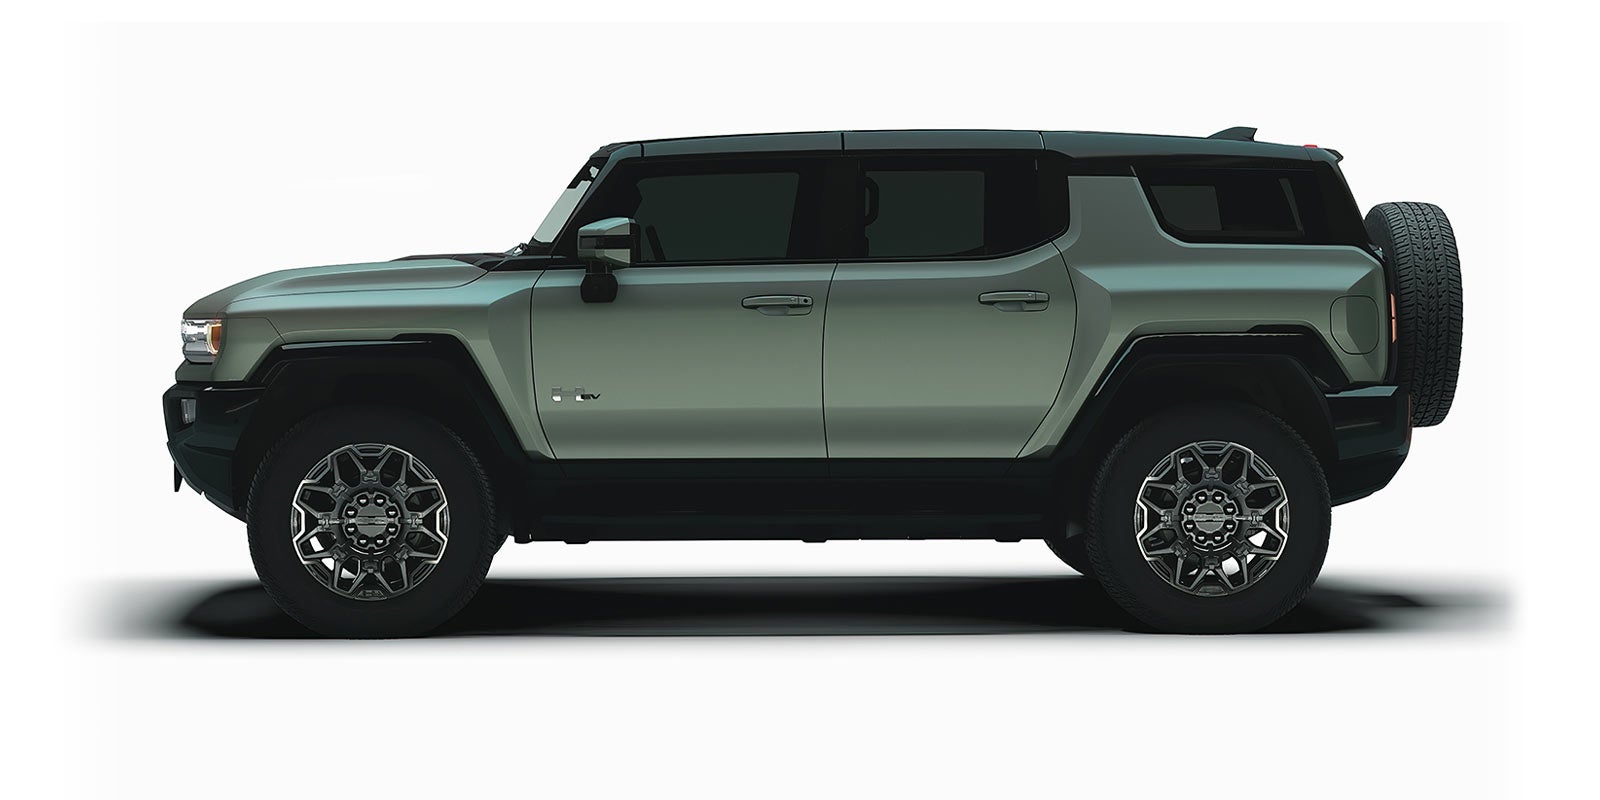 hummer ev pickup and hummer ev | Valley Buick GMC of Hastings in hastings MN